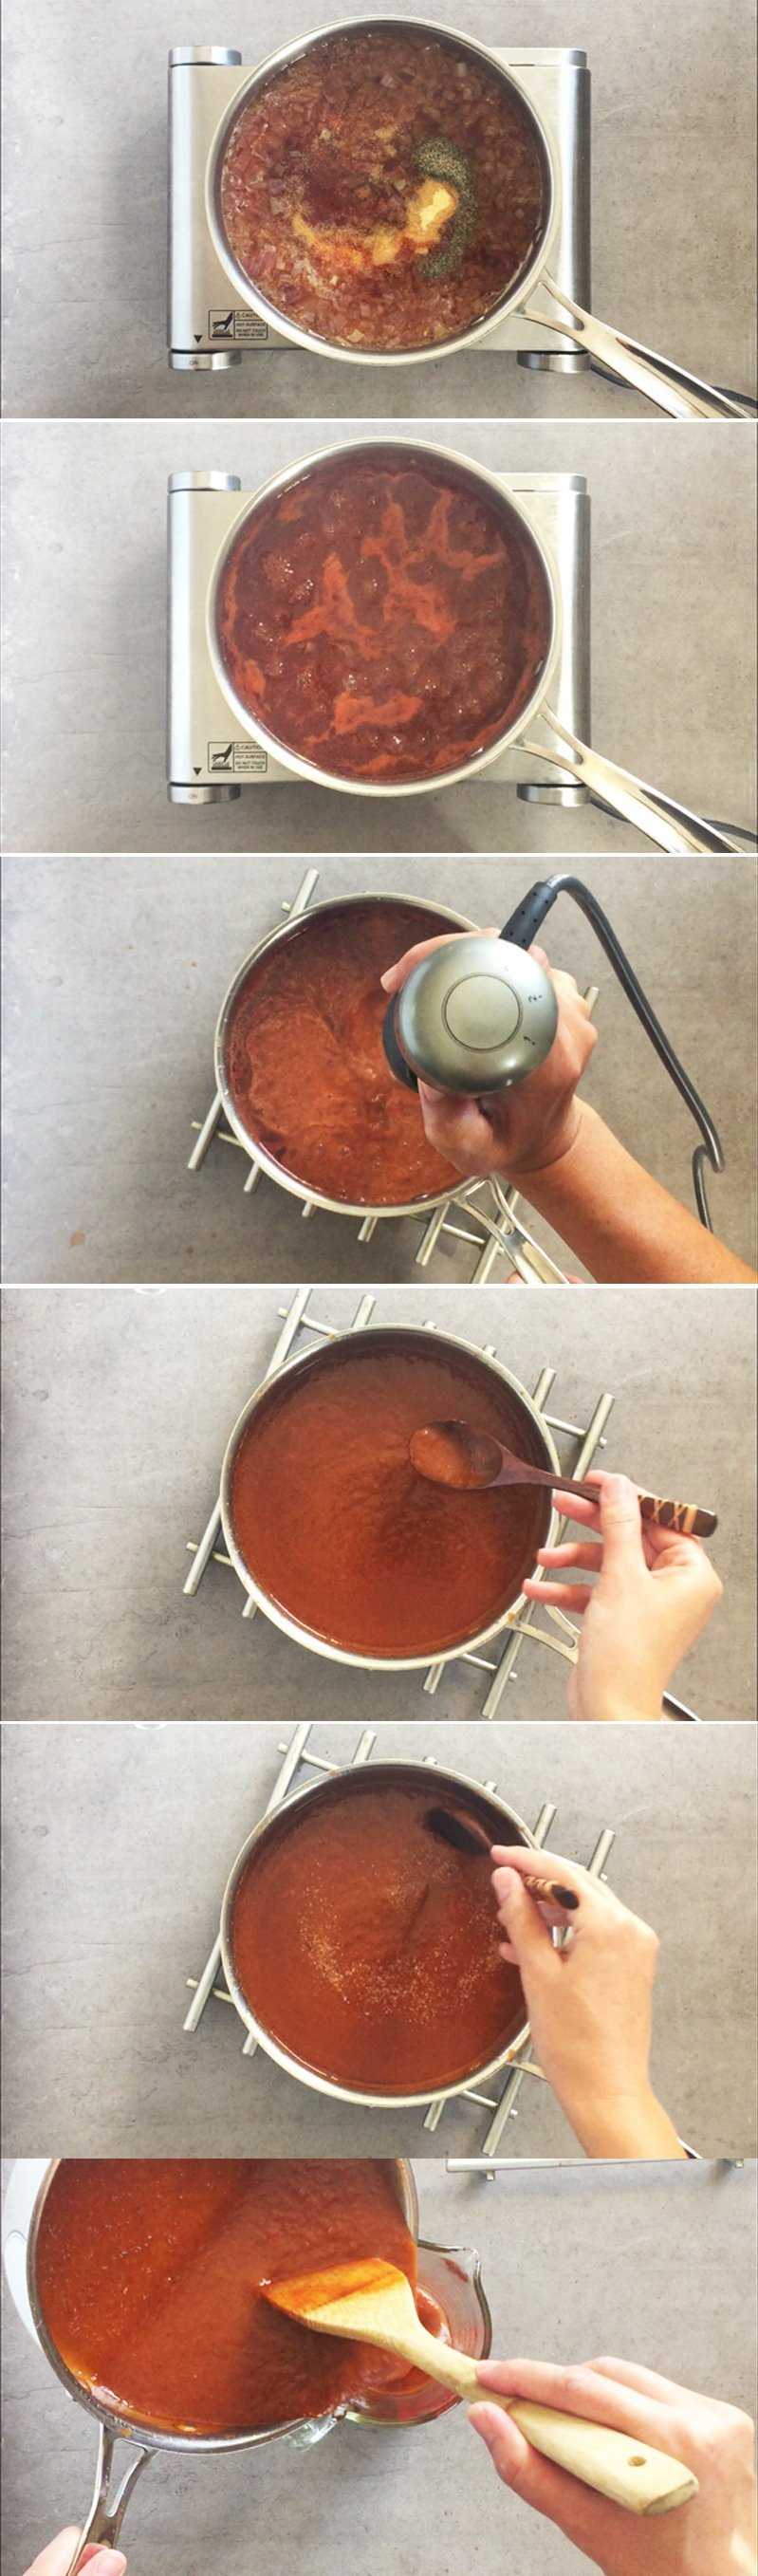 Steps for homemade beer BBQ sauce (part 2)